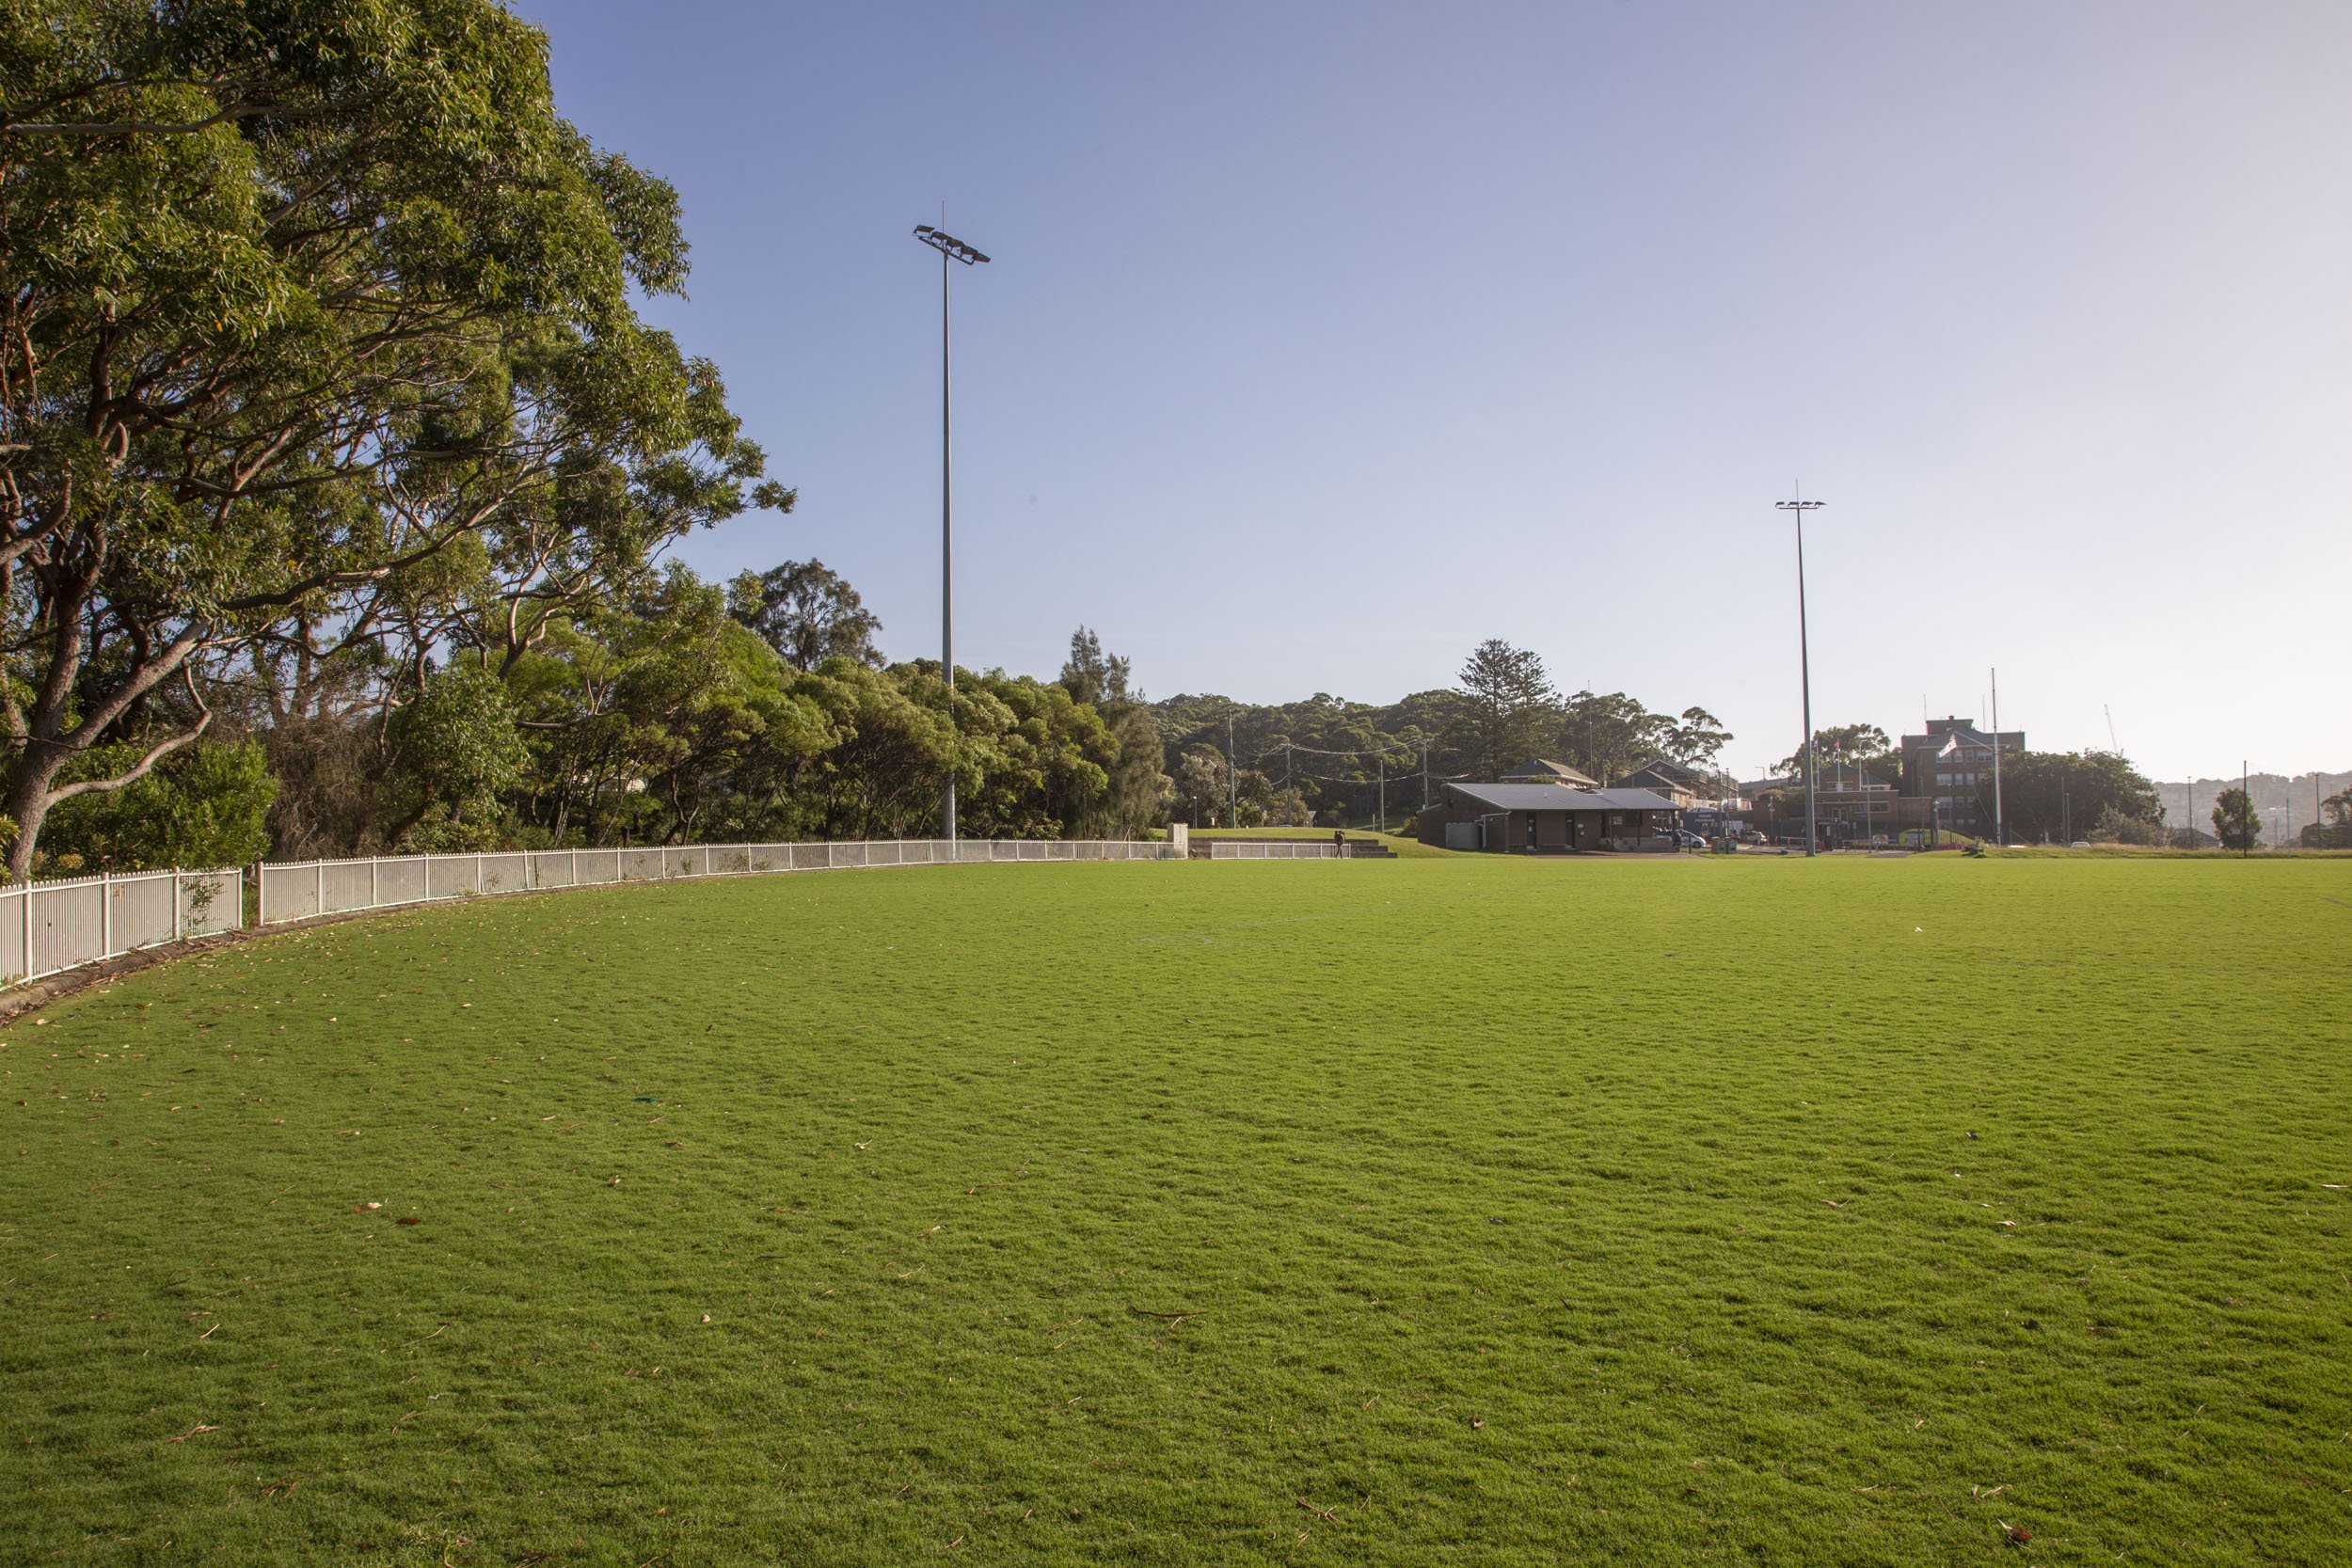 Detractors of natural turf on Middle Head Oval have been converted.